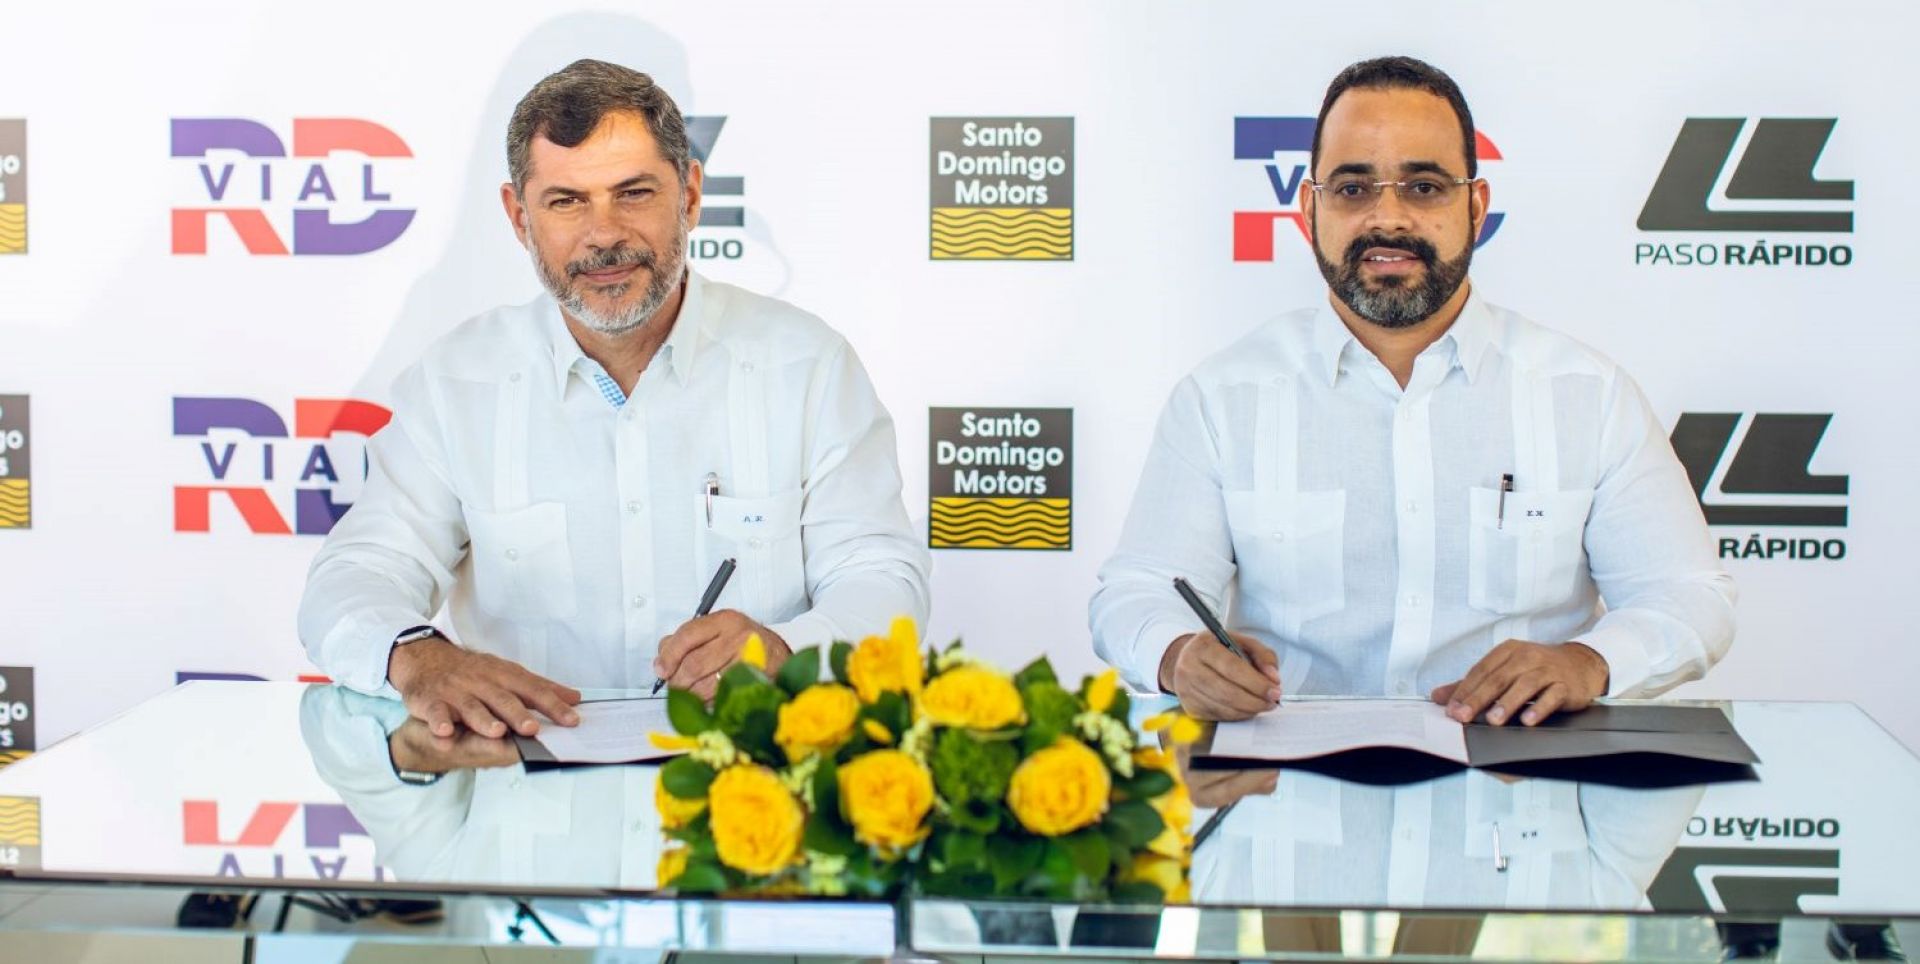 Santo Domingo Motors and Fideicomiso RD Vial formalize alliance that will optimize traffic through tolls